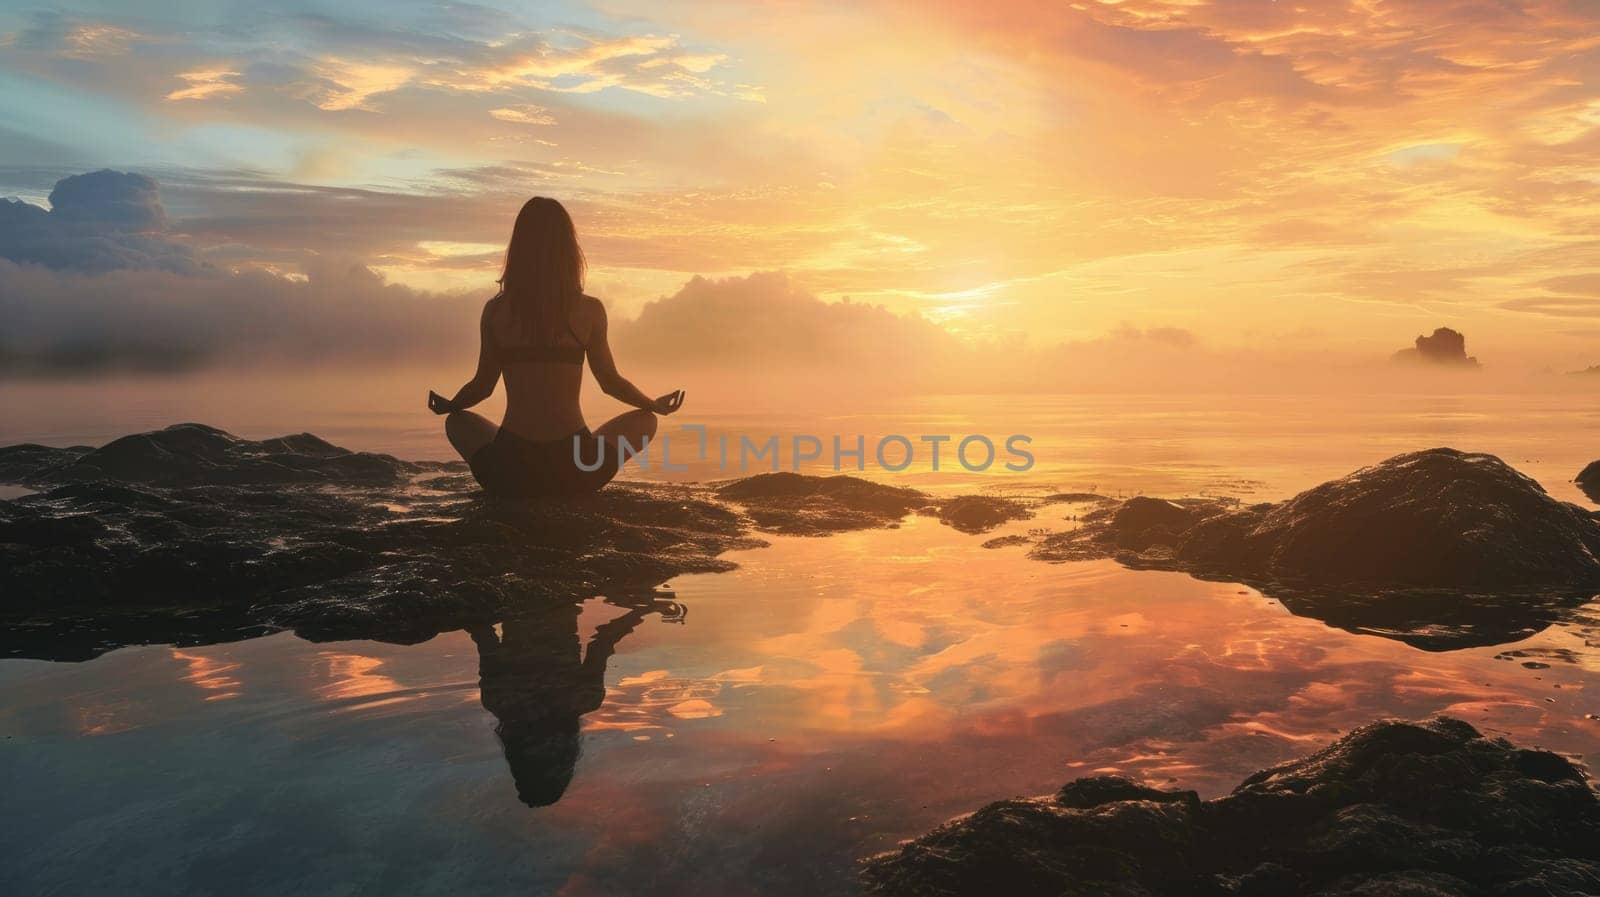 The picture of the young or adult female human doing the yoga pose for relaxation or meditating the mind in the middle of the nature under the bright sun in the daytime of a dawn or dusk day. AIGX03.